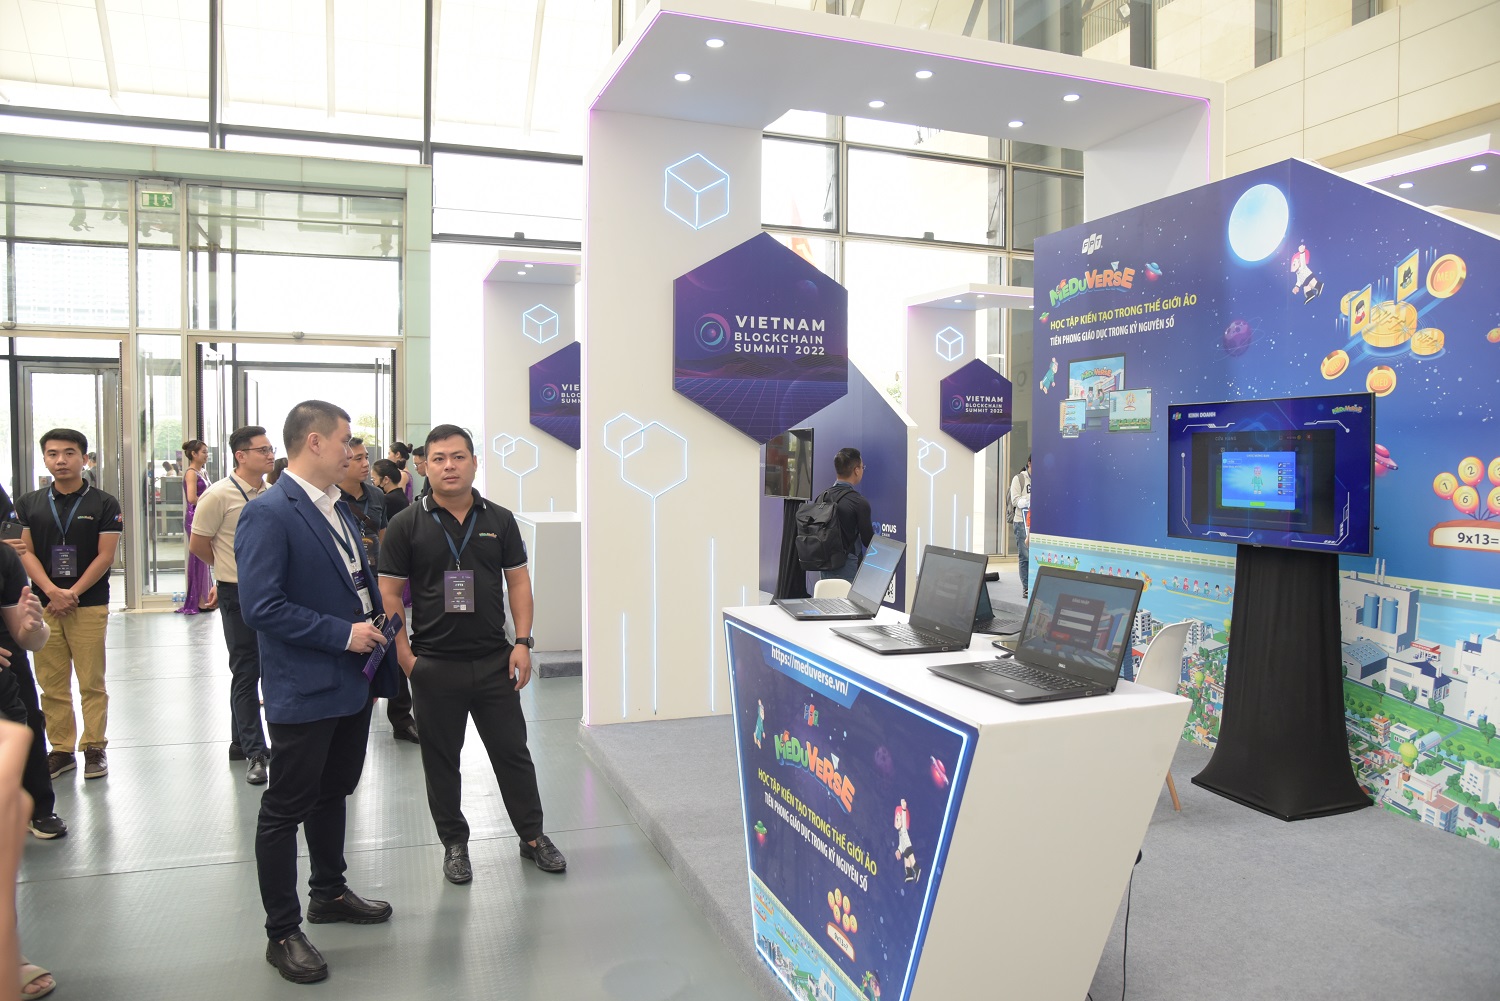 The exhibition booth of the Meduverse developed by FPT Software